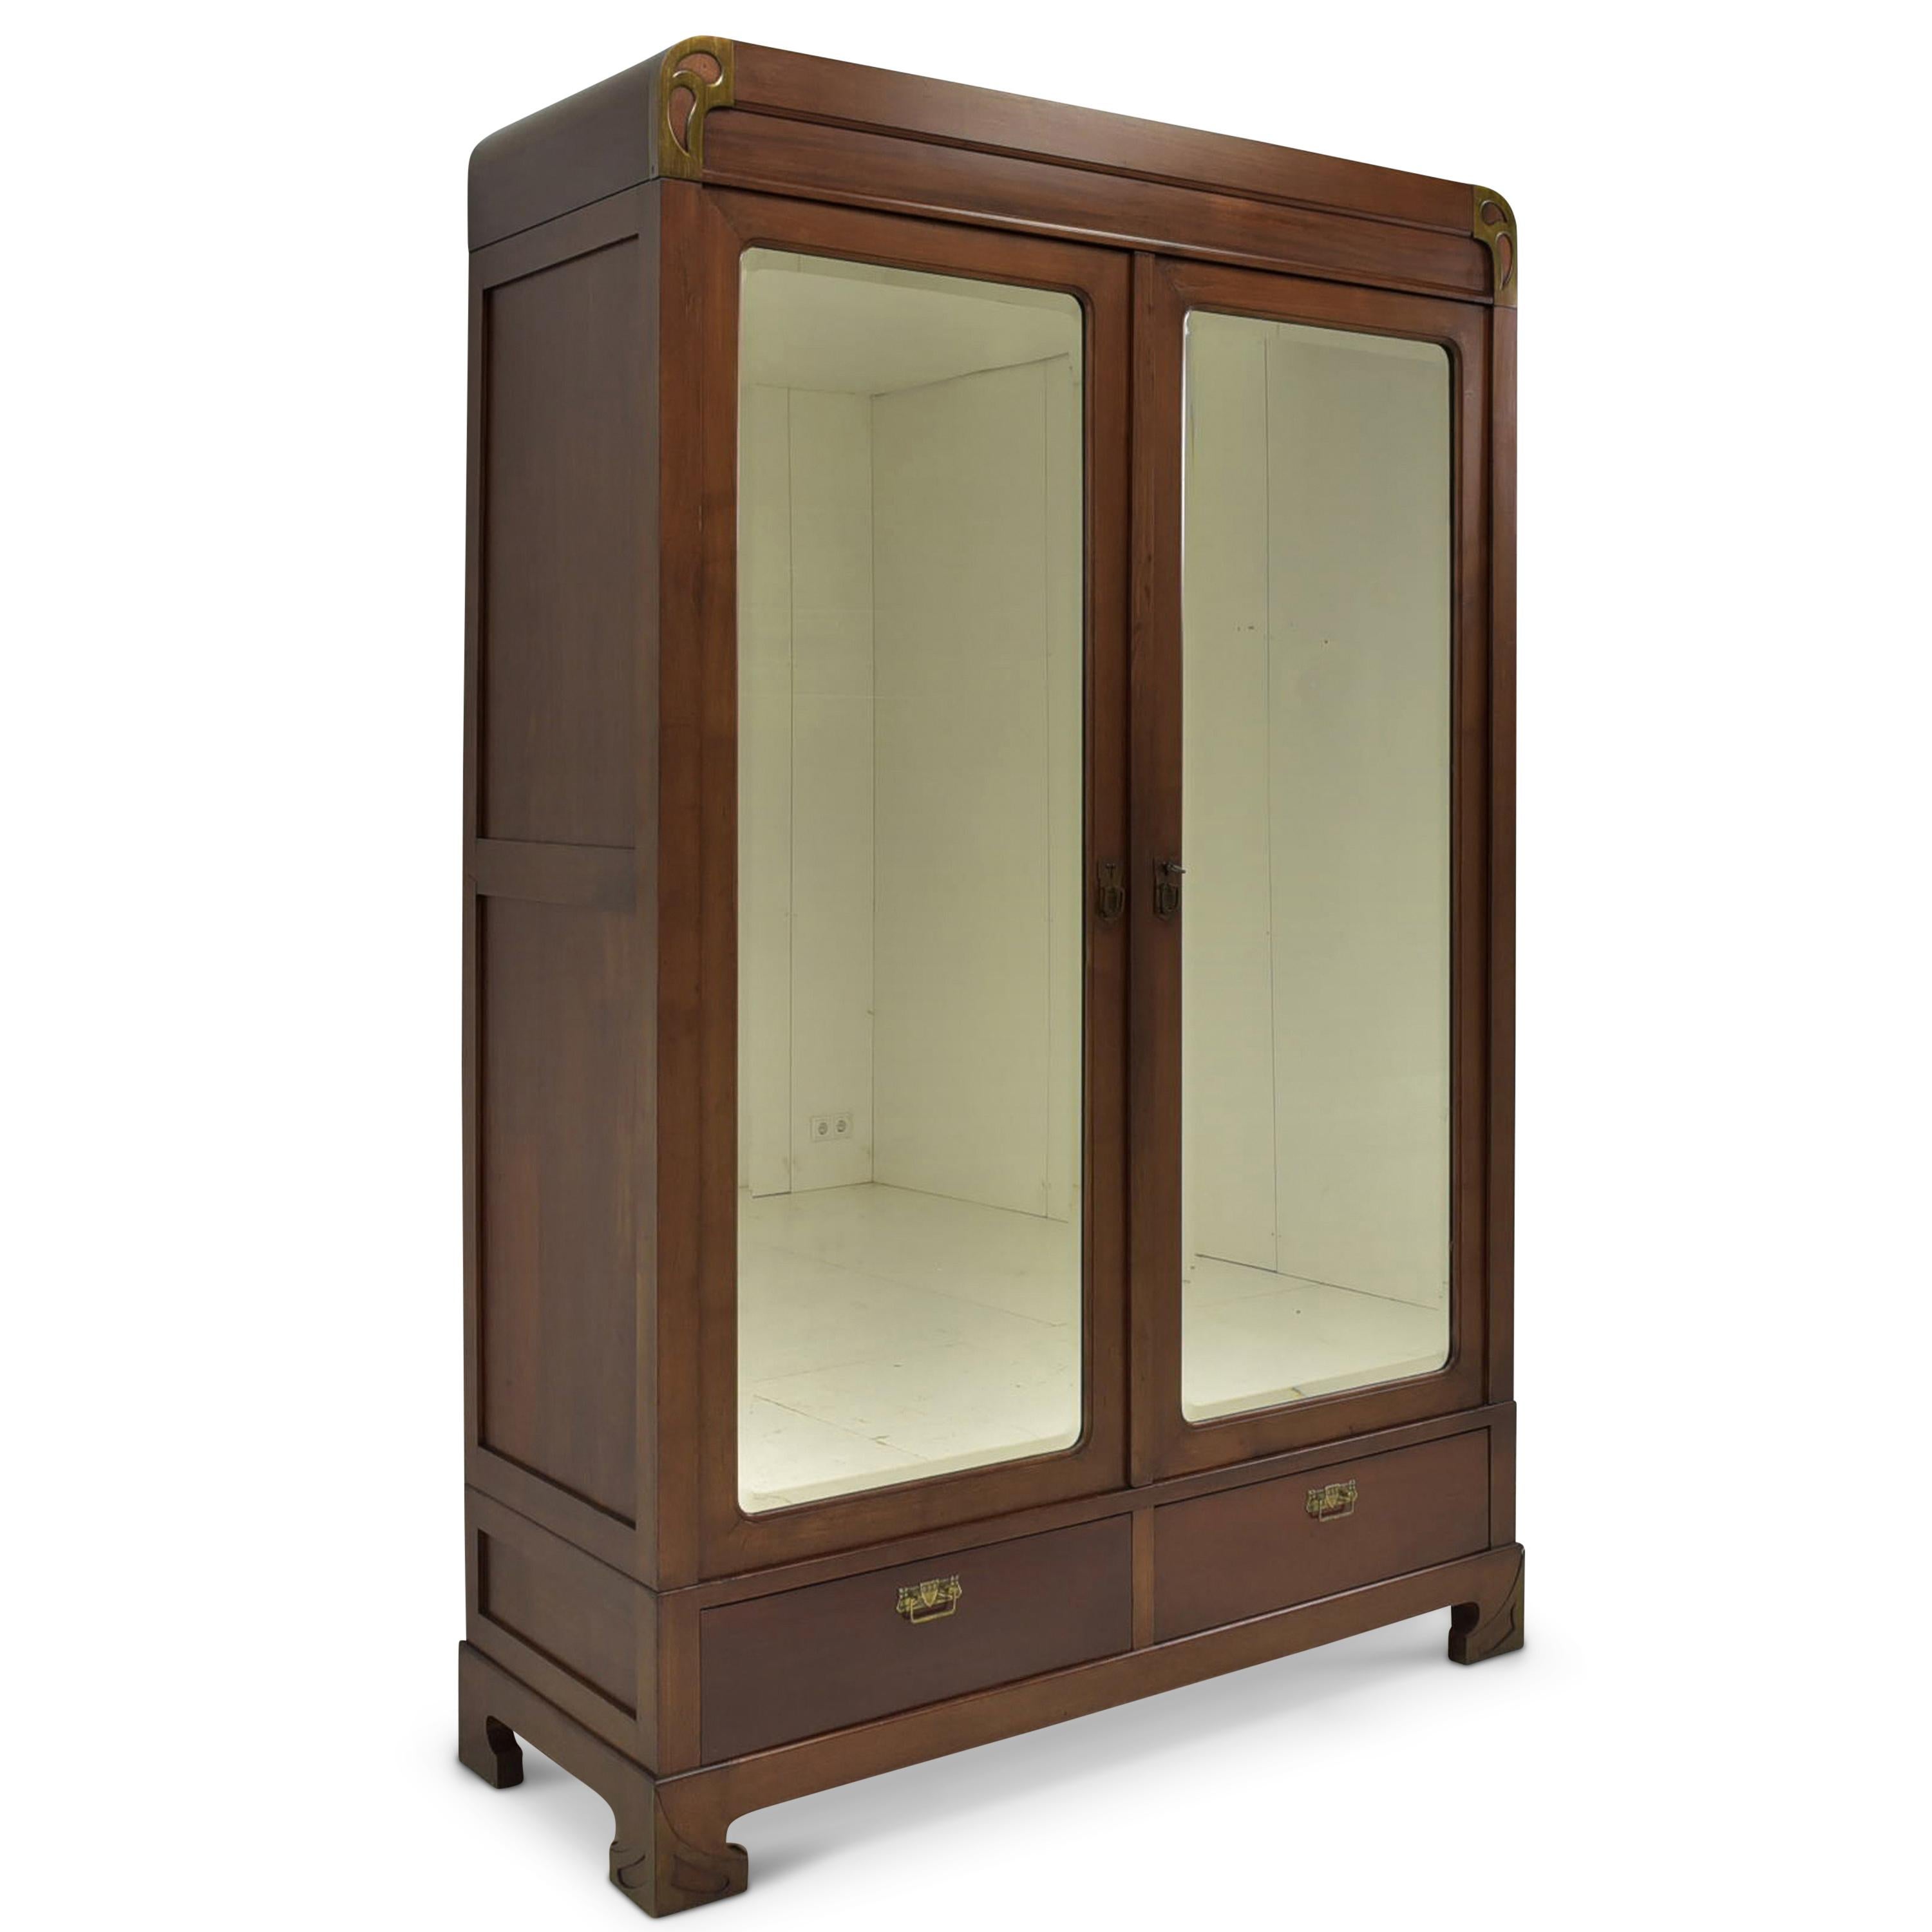 Hallway cabinet restored Art Nouveau around 1920 mahogany cabinet

Features:
Two-door model with clothes rail and two drawers
Very high quality processing
Original bar lock
Original faceted mirrors
Beautiful brass applications
The right